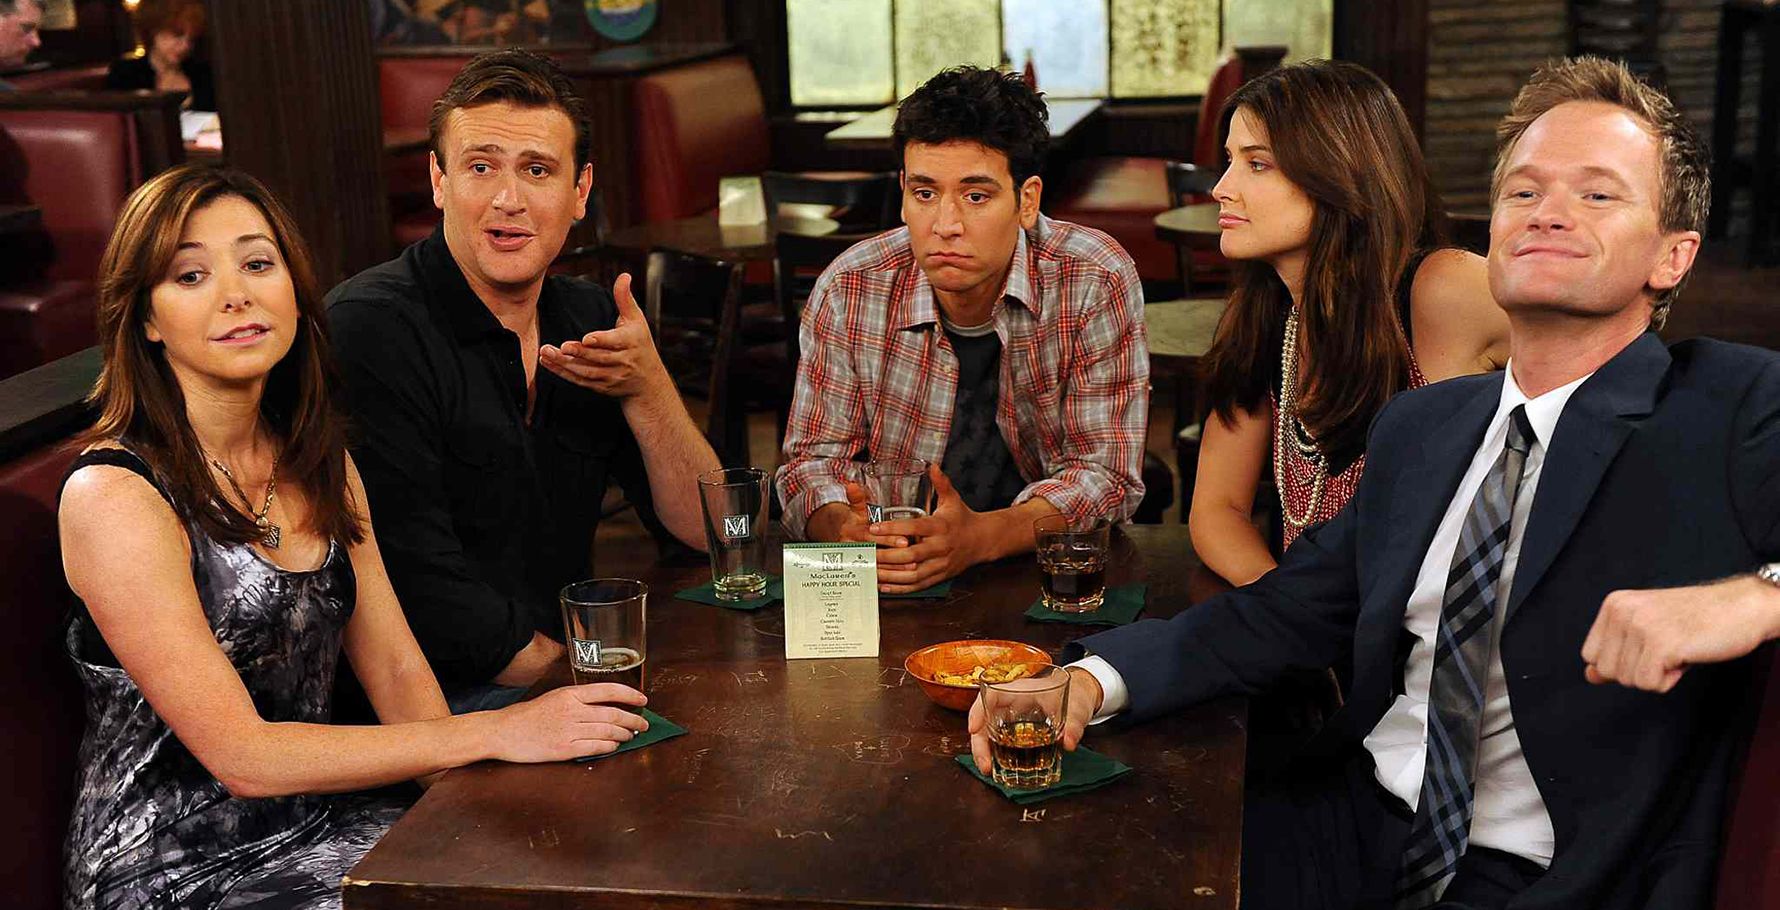 The How I Met Your Mother cast at the pub.